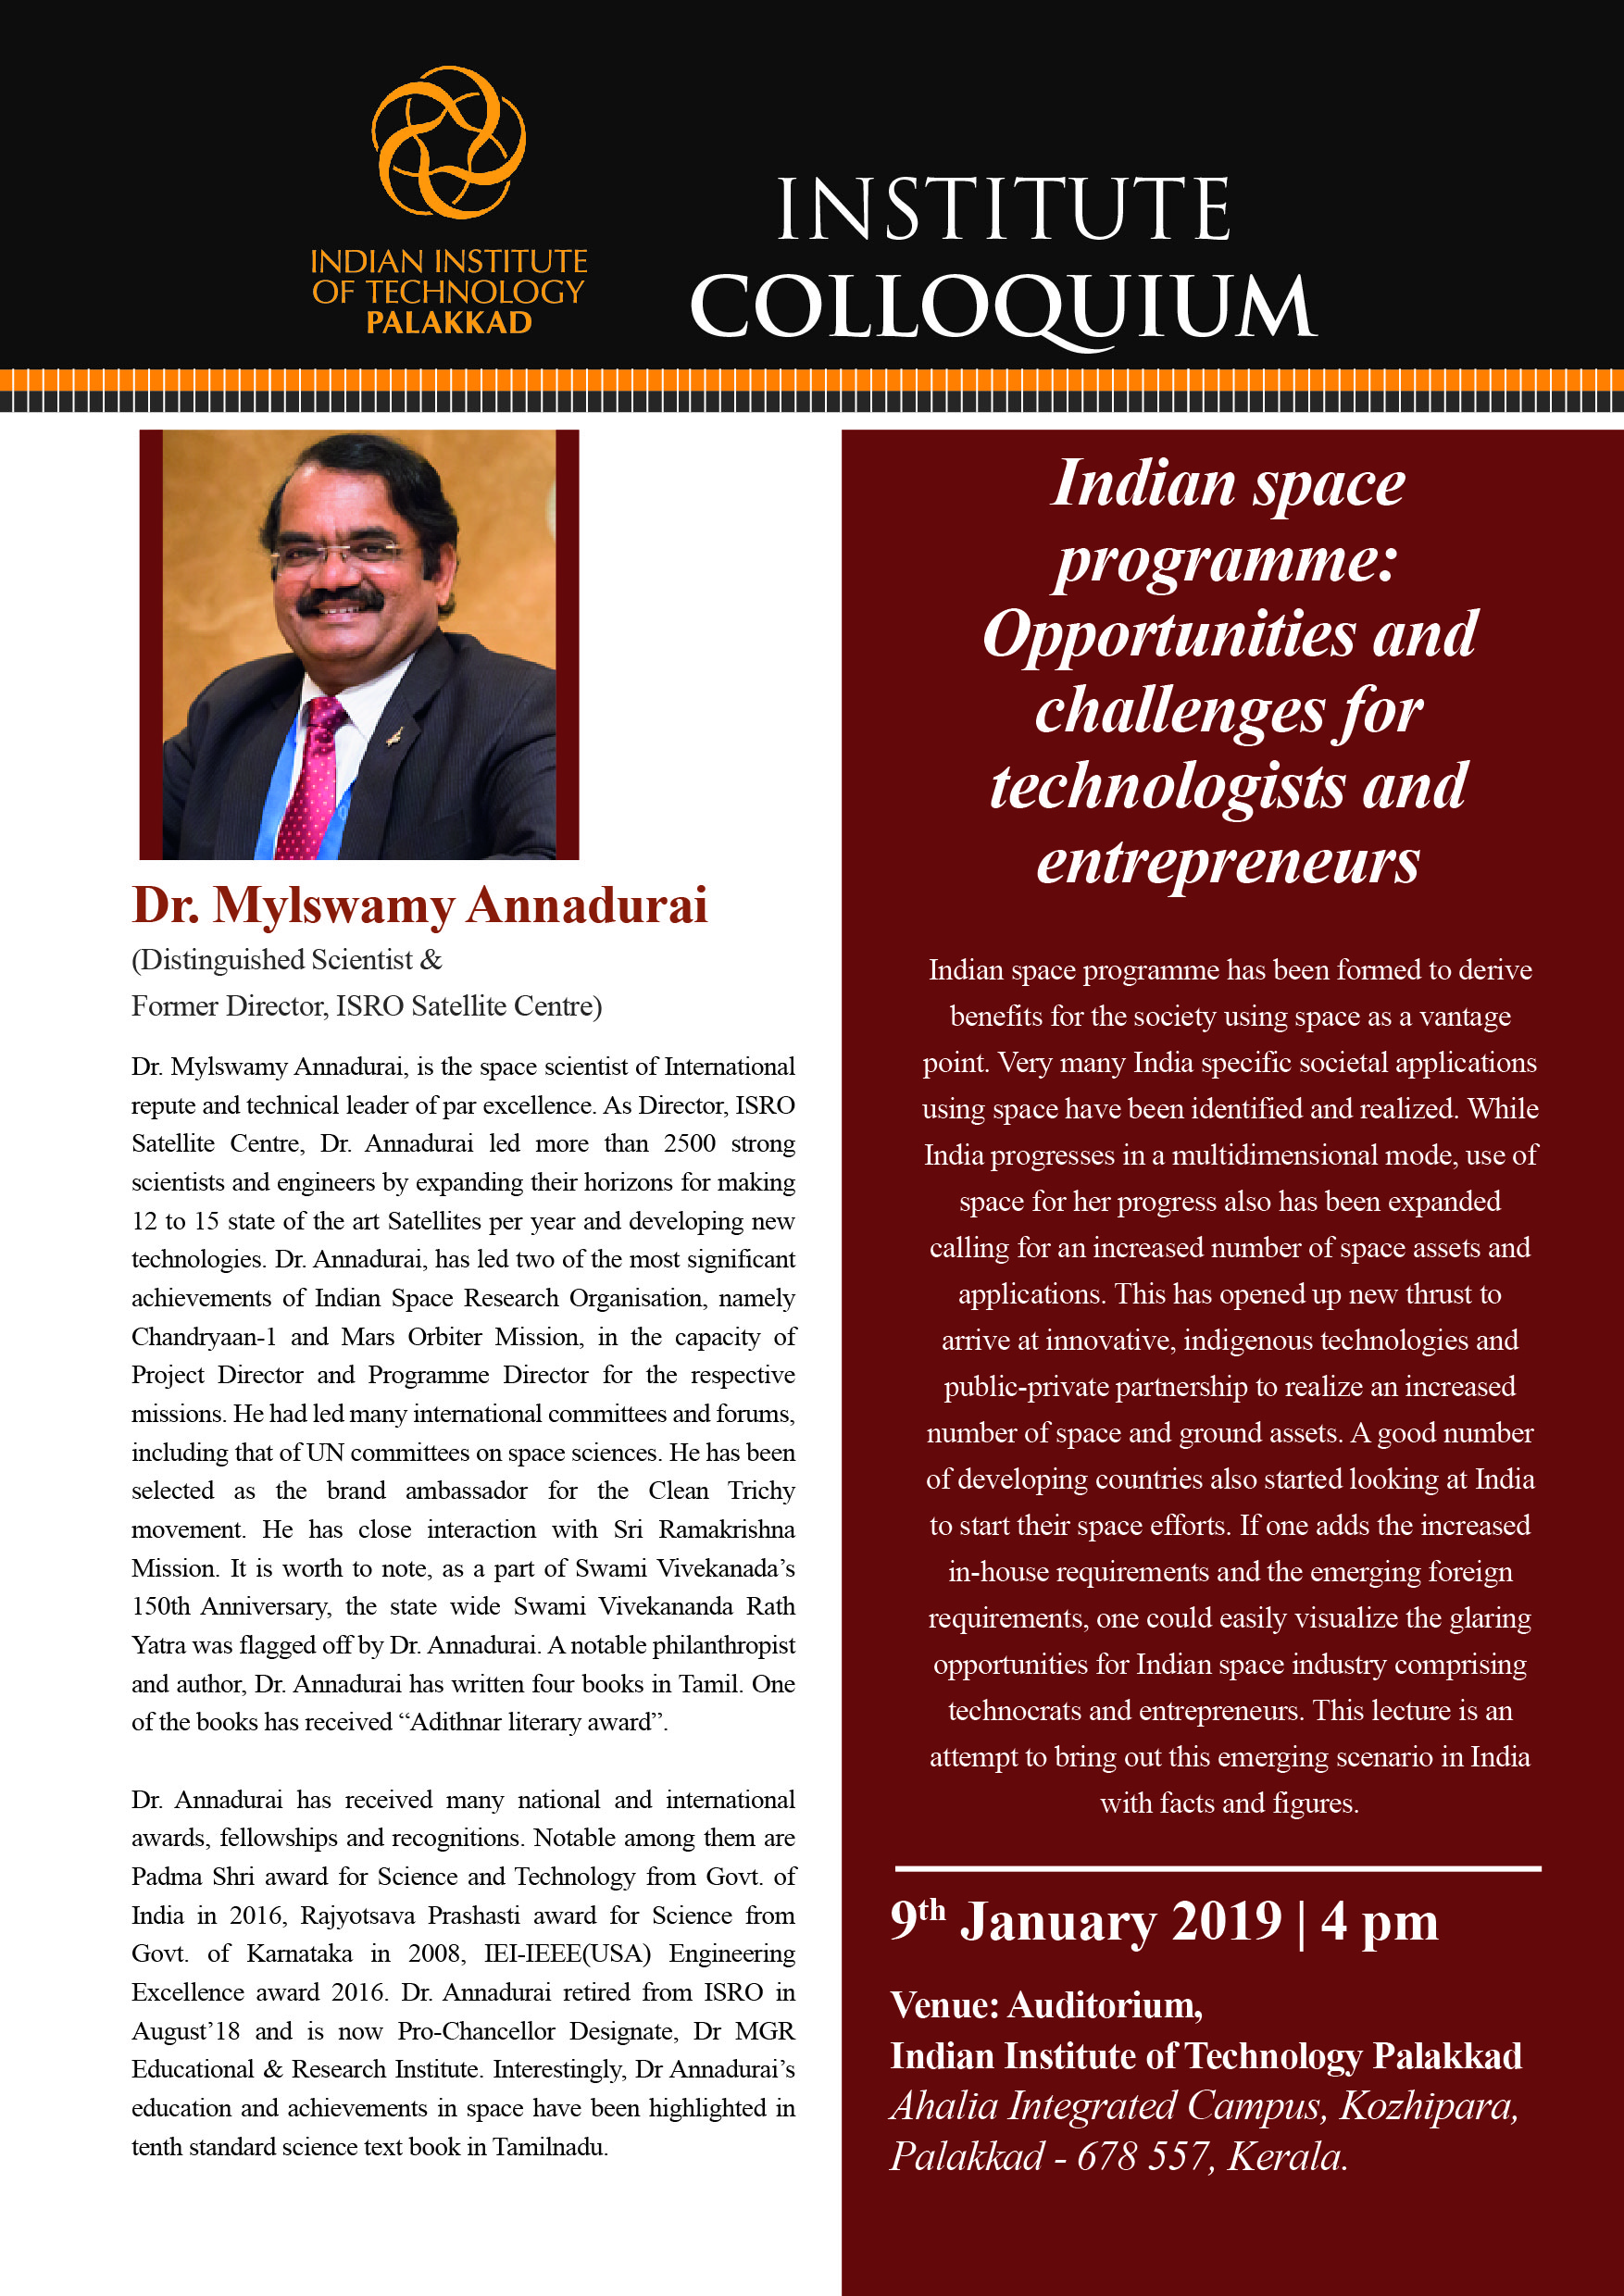 Indian Space Programme: Opportunities and Challenges for Technologists & Entrepreneurs